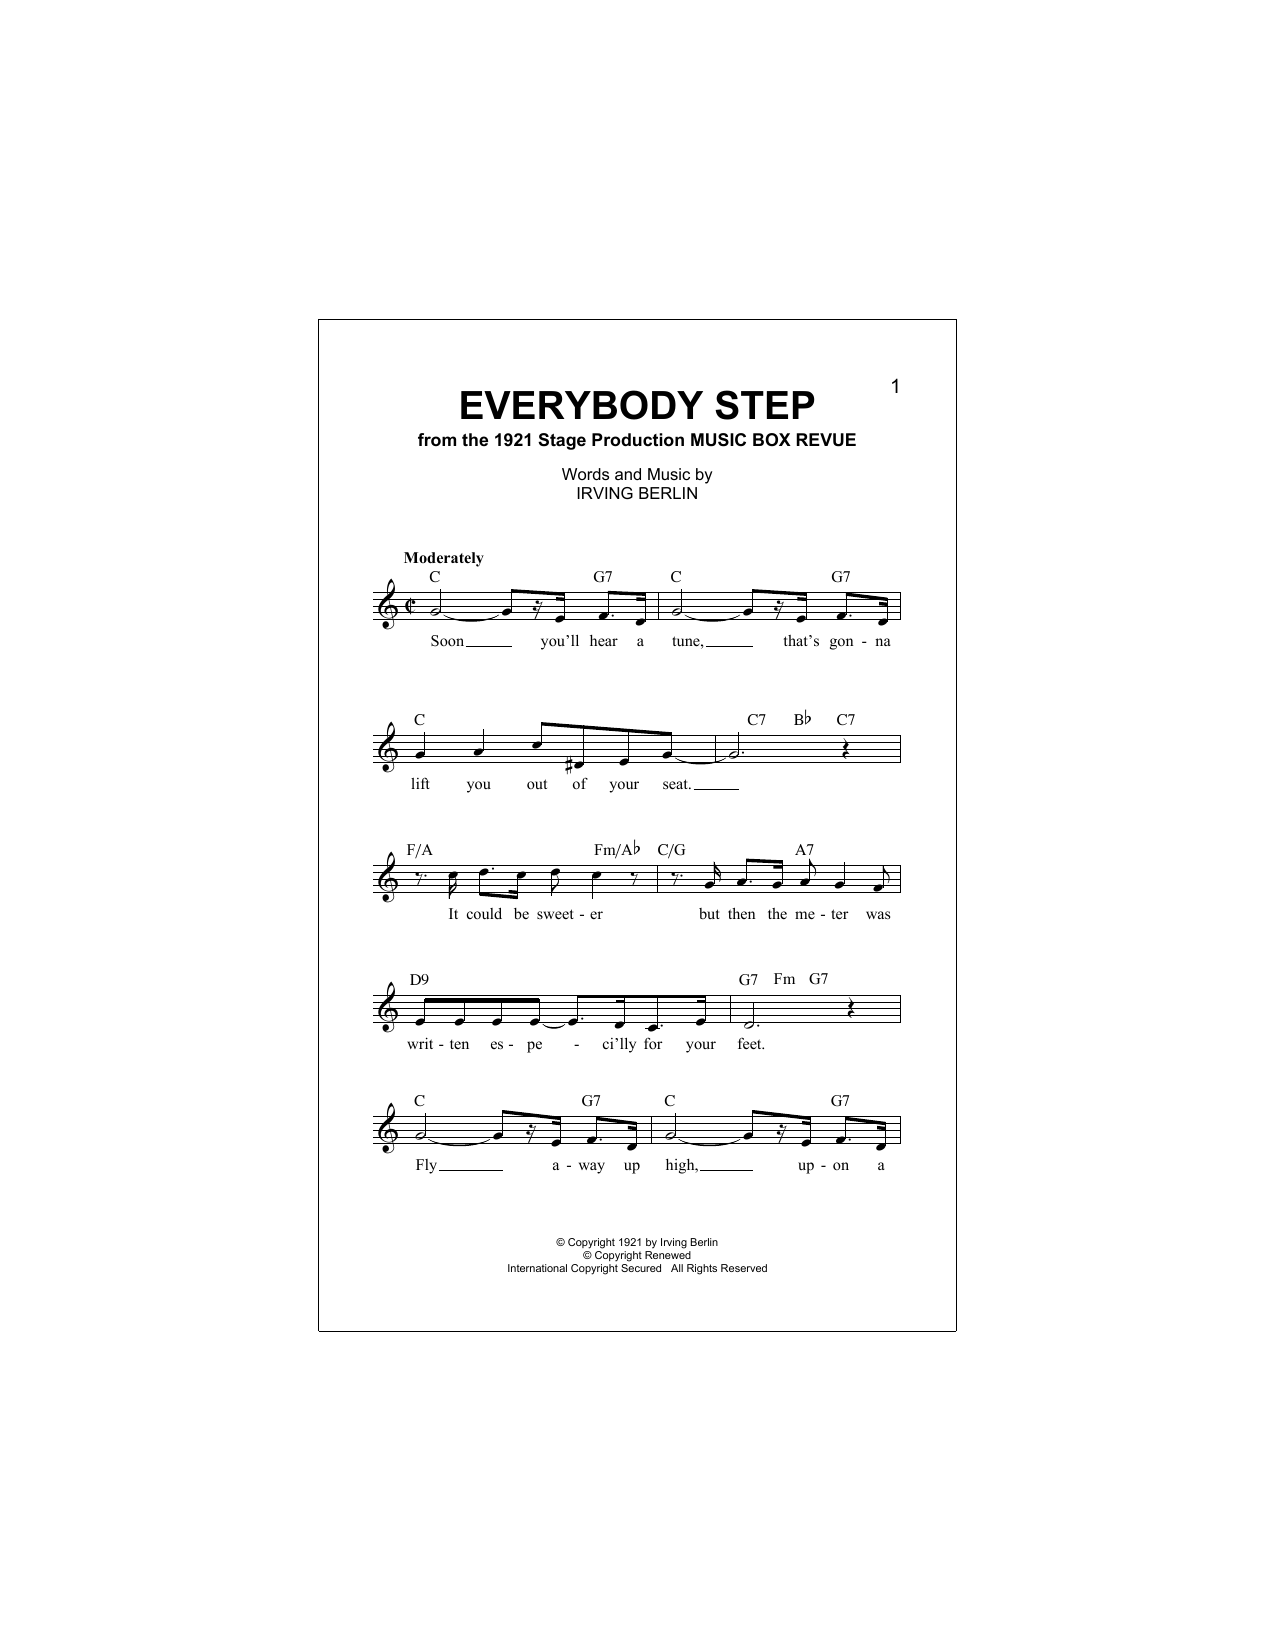 Irving Berlin Everybody Step sheet music notes and chords. Download Printable PDF.